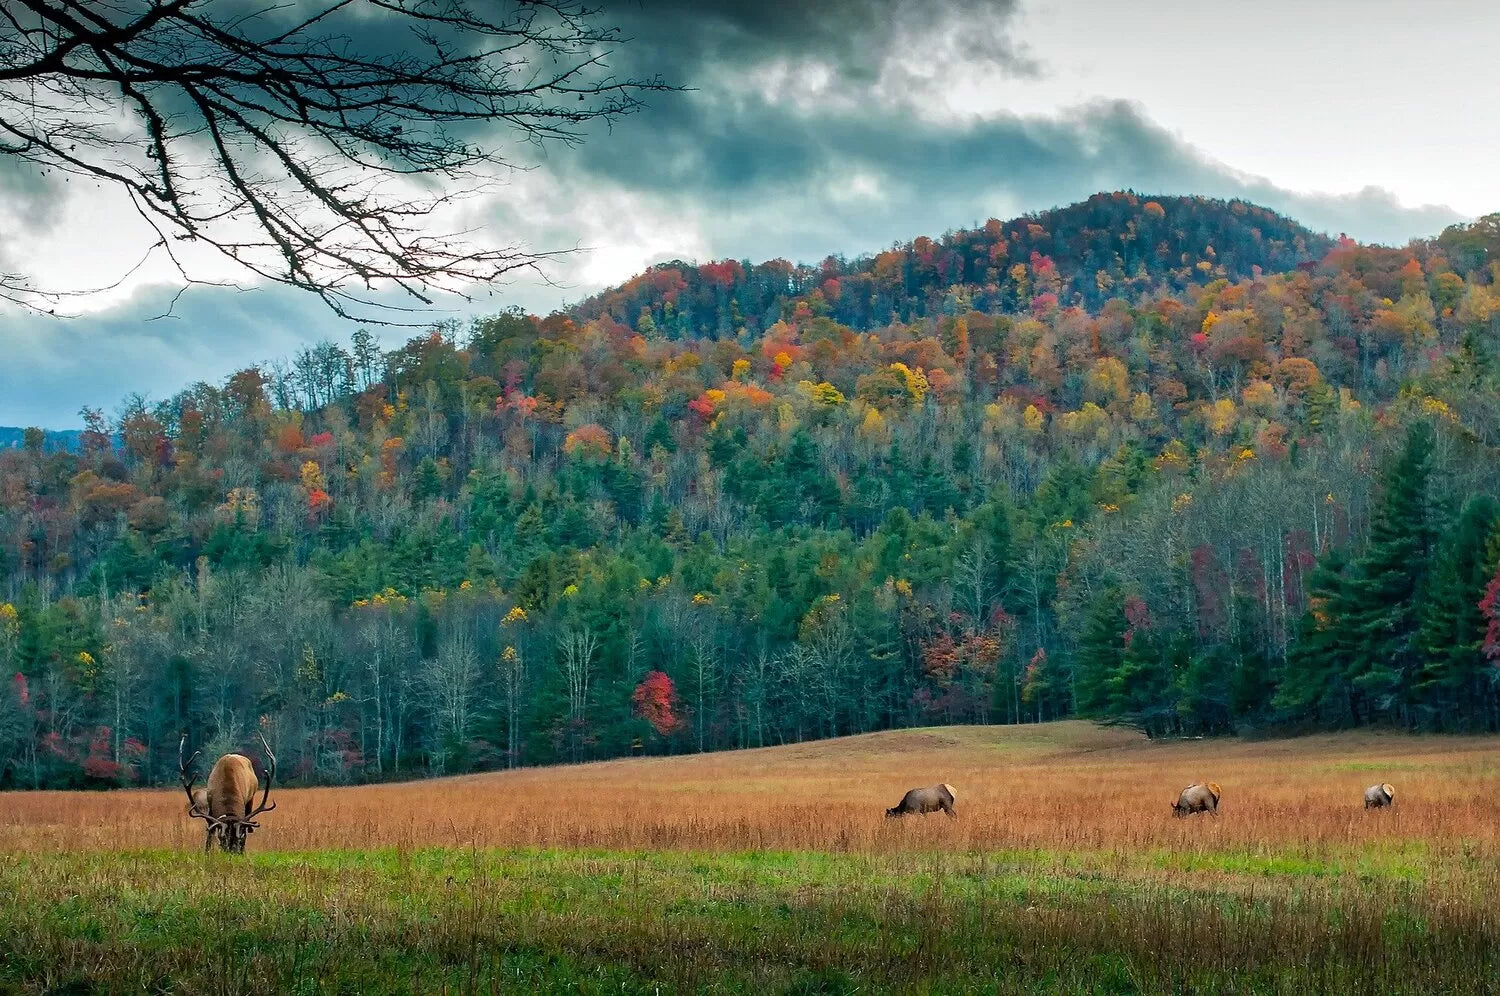 A forest in North Carolina with deer in the foreground